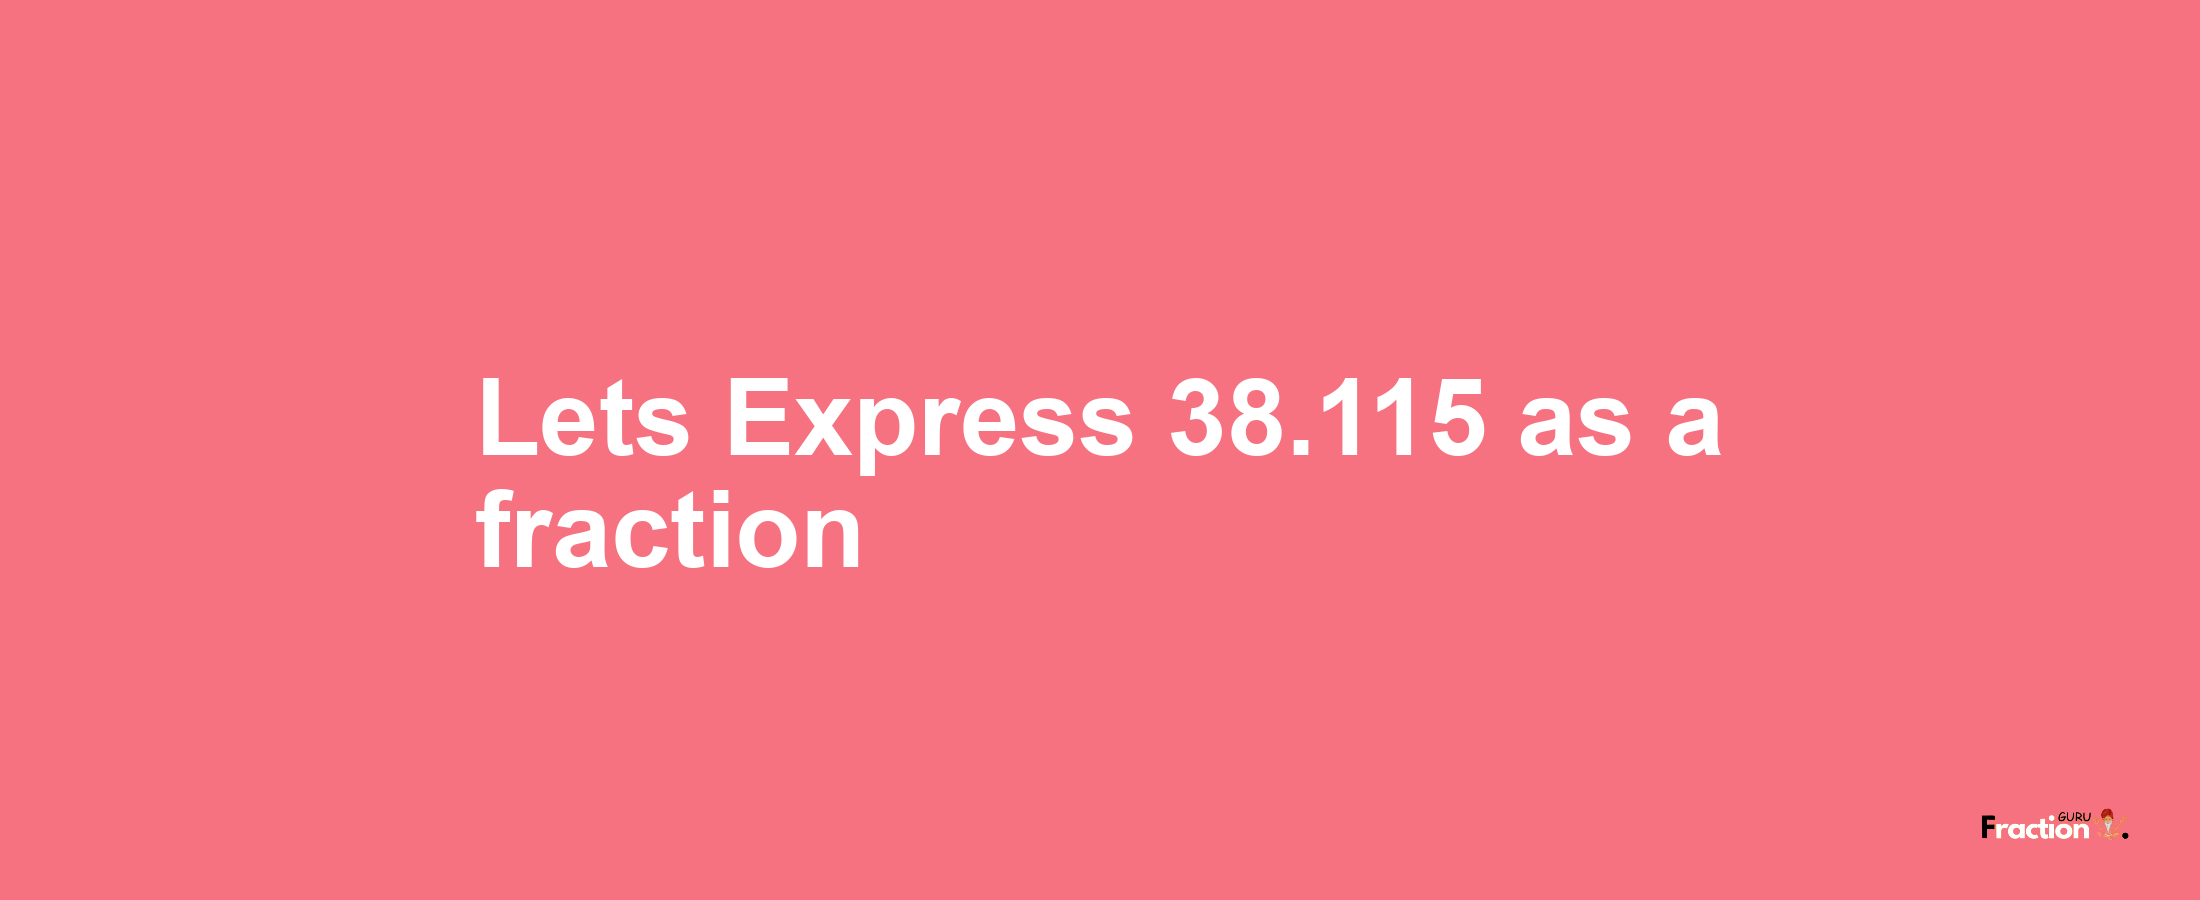 Lets Express 38.115 as afraction